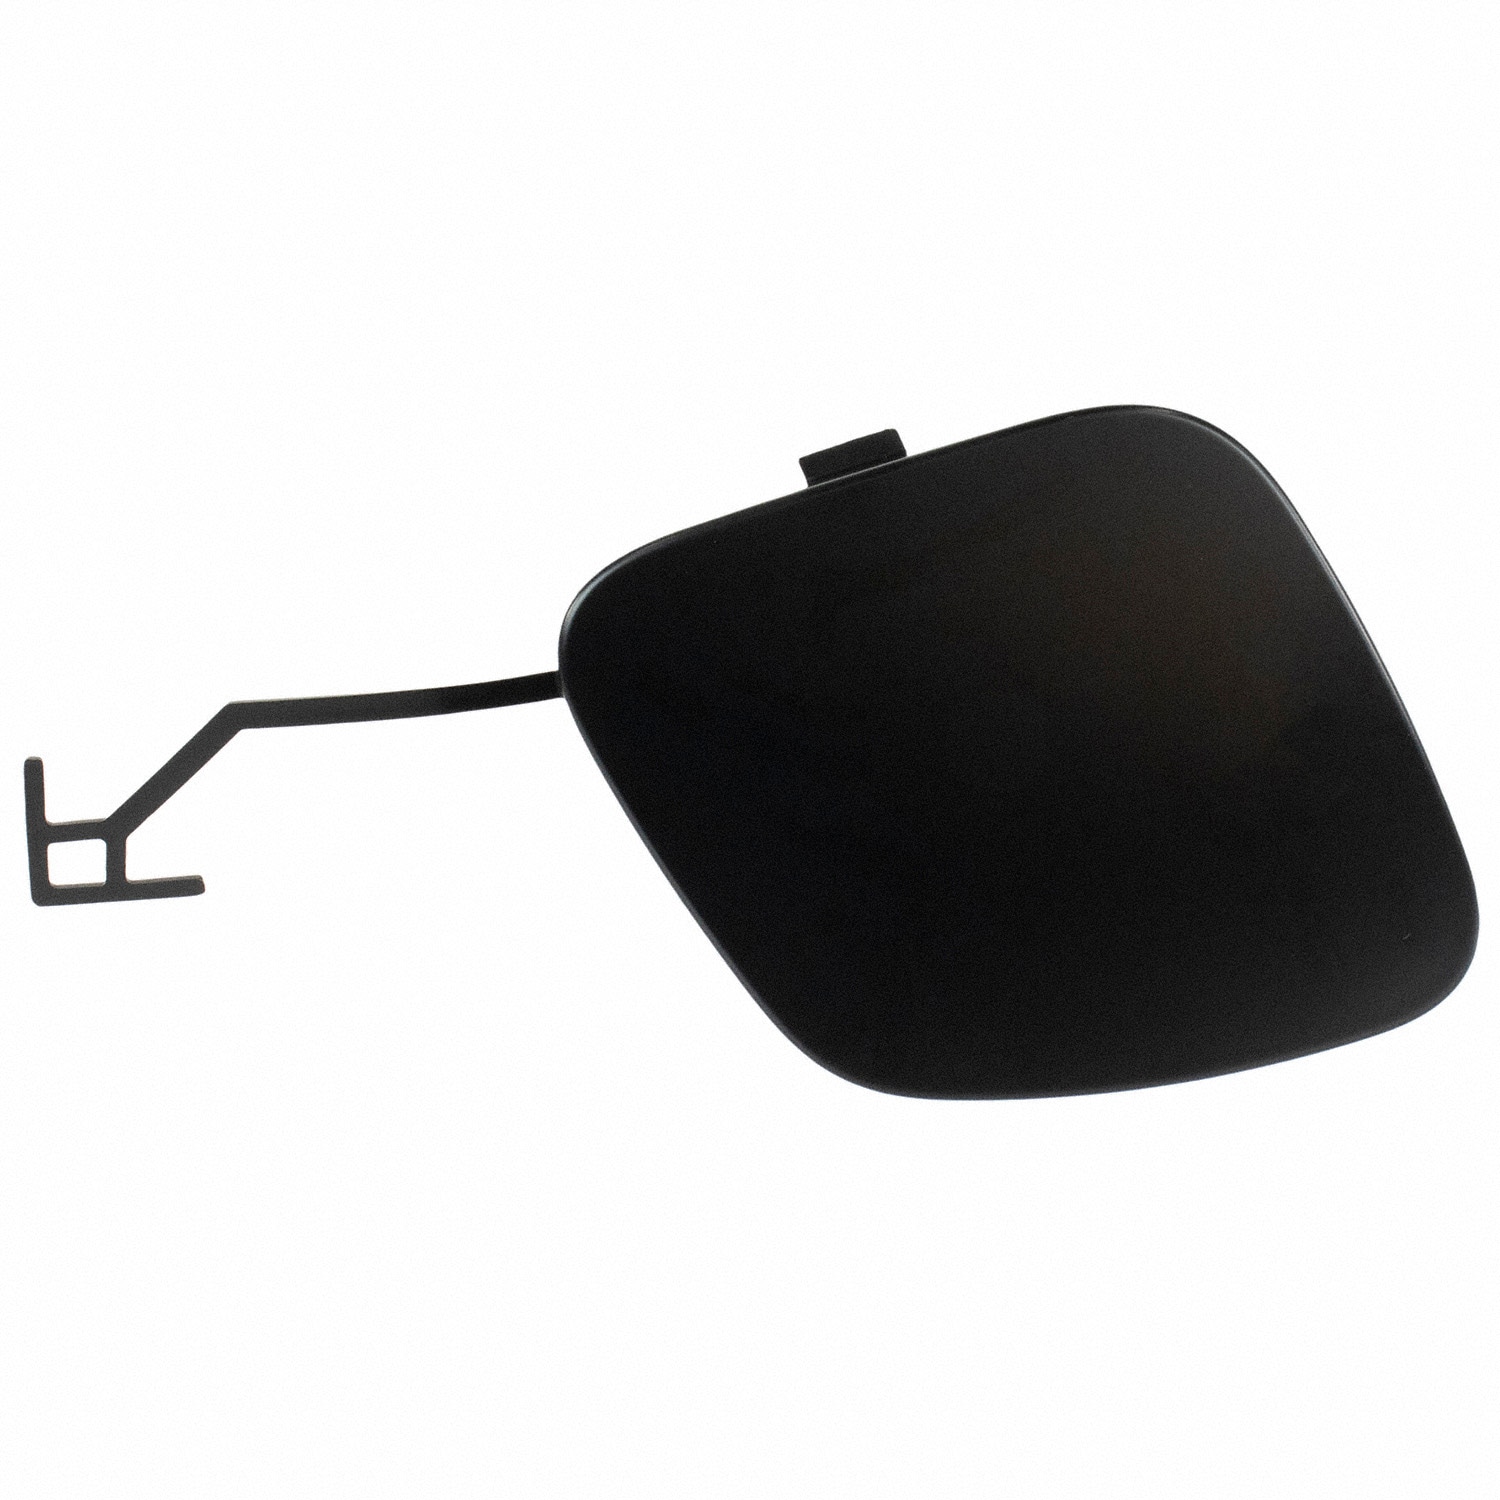 My IND Front Bumper Tow Hook Cover Cap Black ABS Eye Cover For